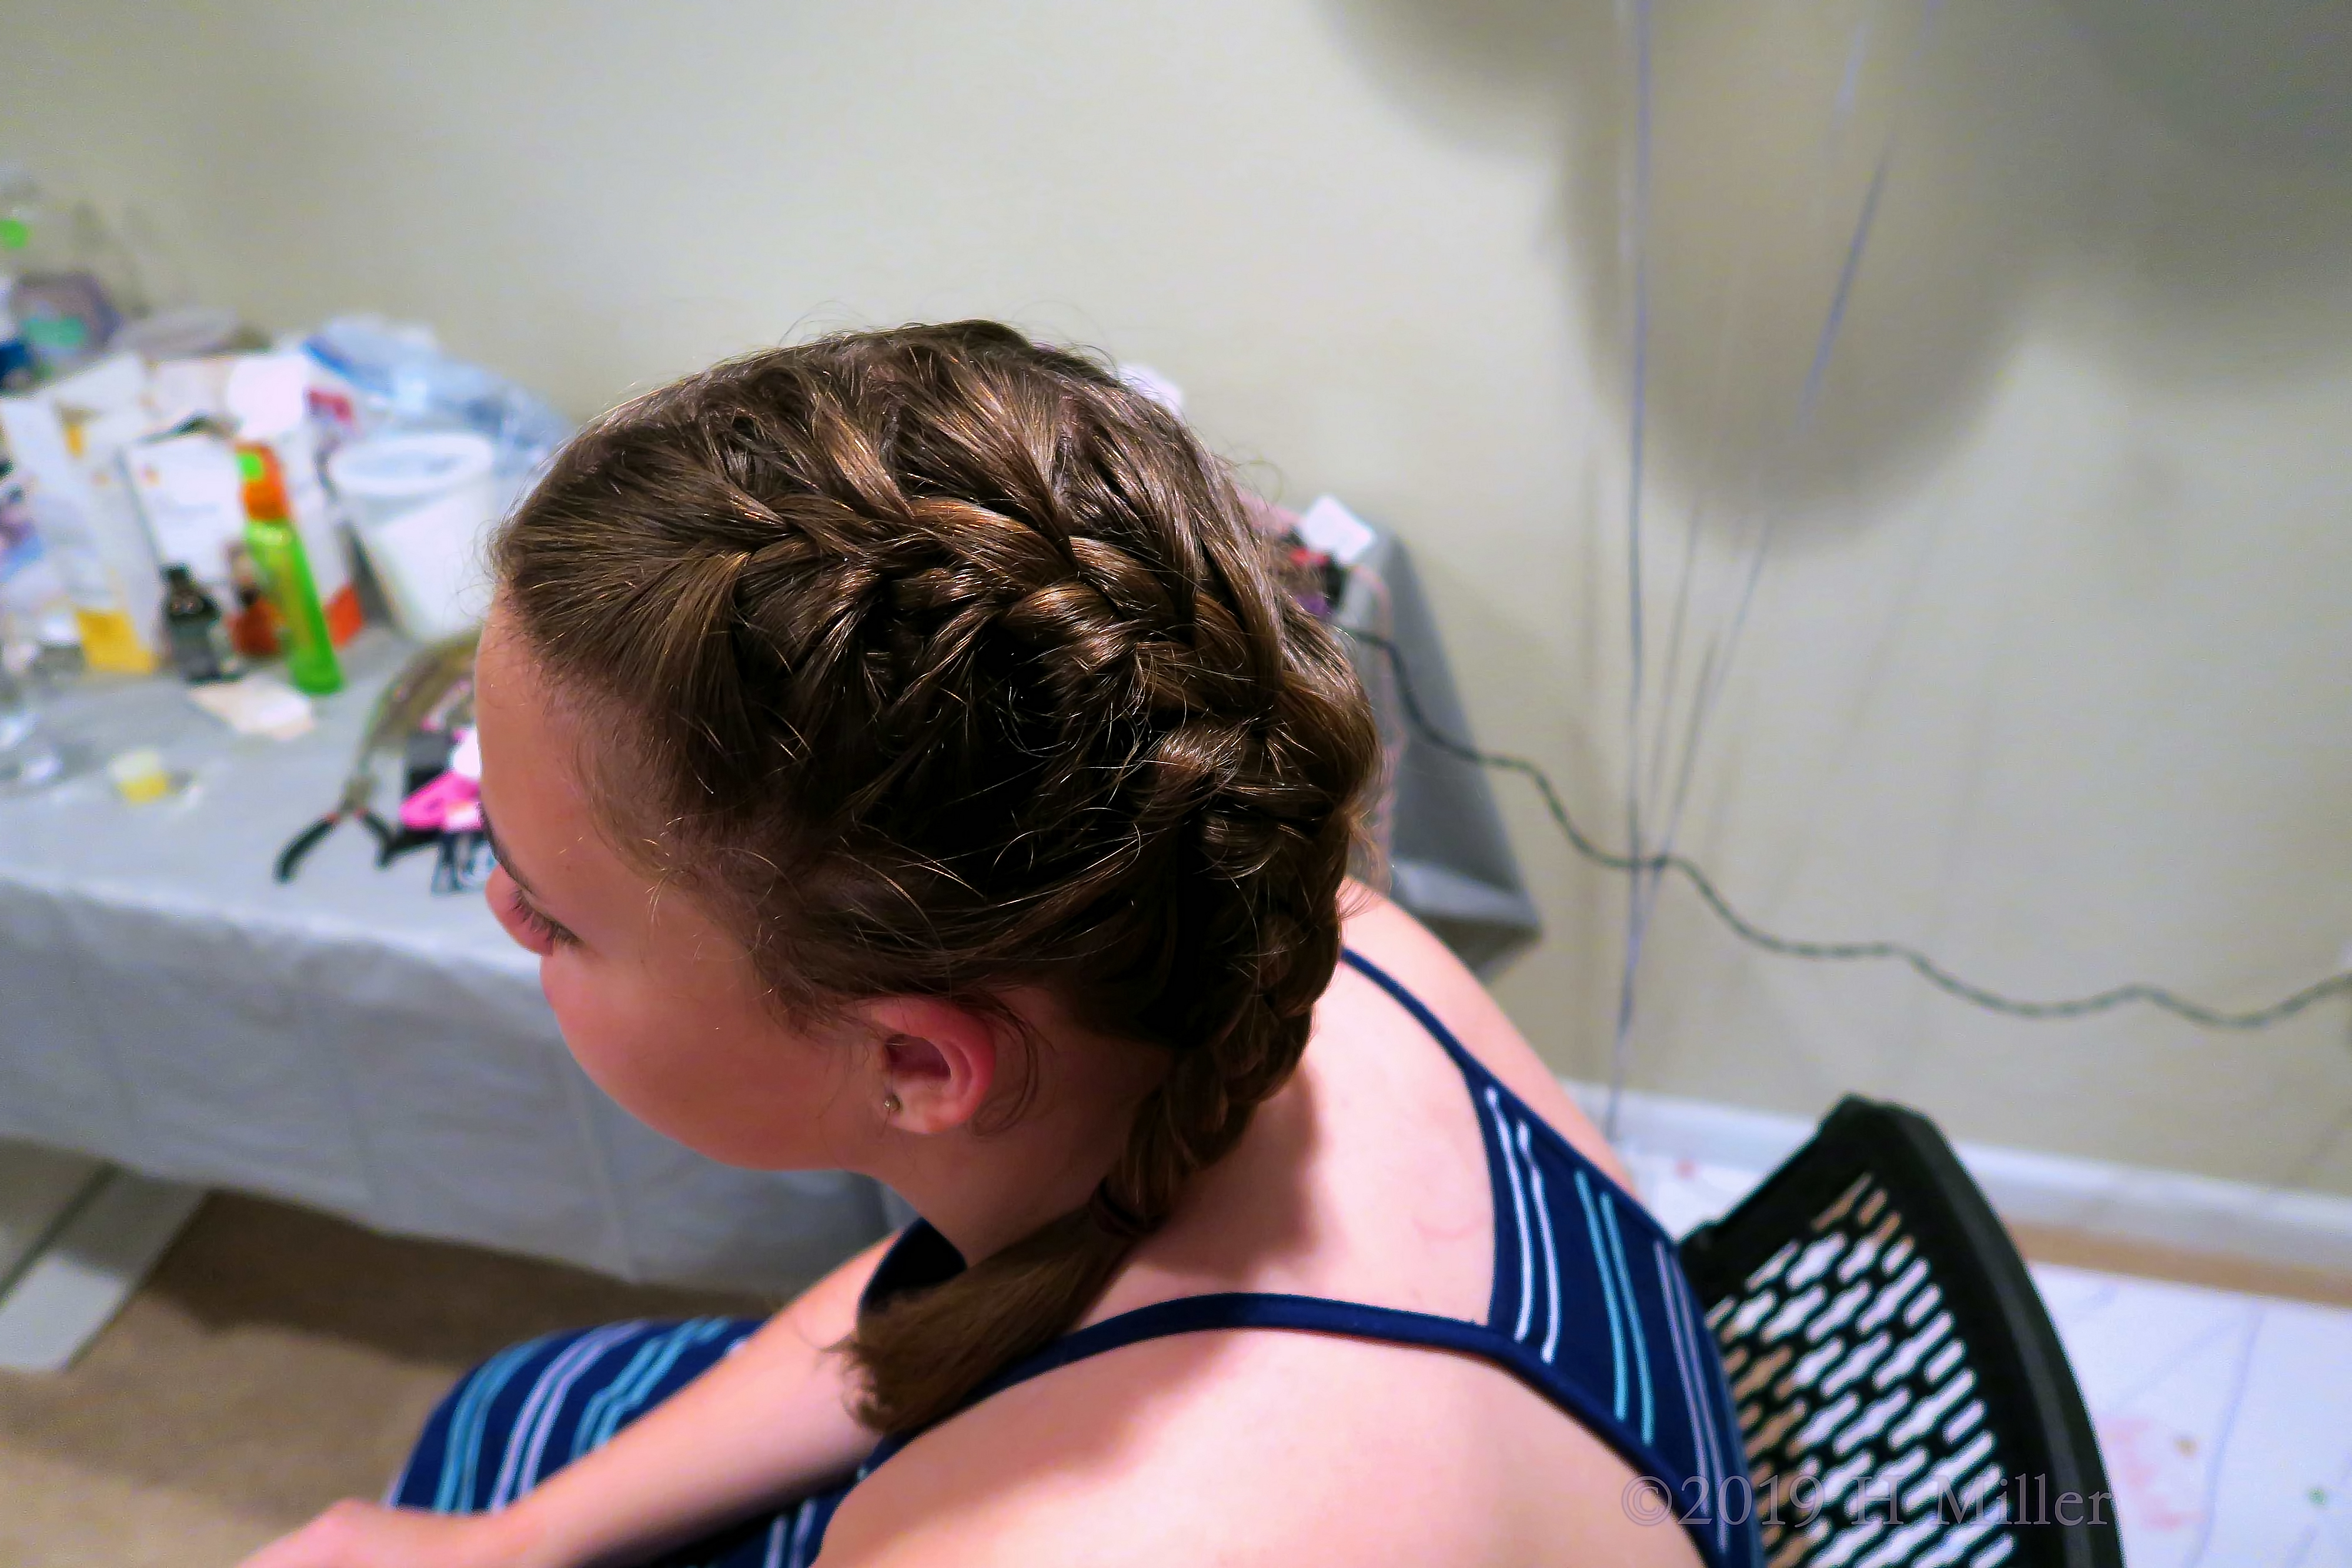 It's Time To Show Off Cute Braided Girls Hairstyles! Spa Party Fun 